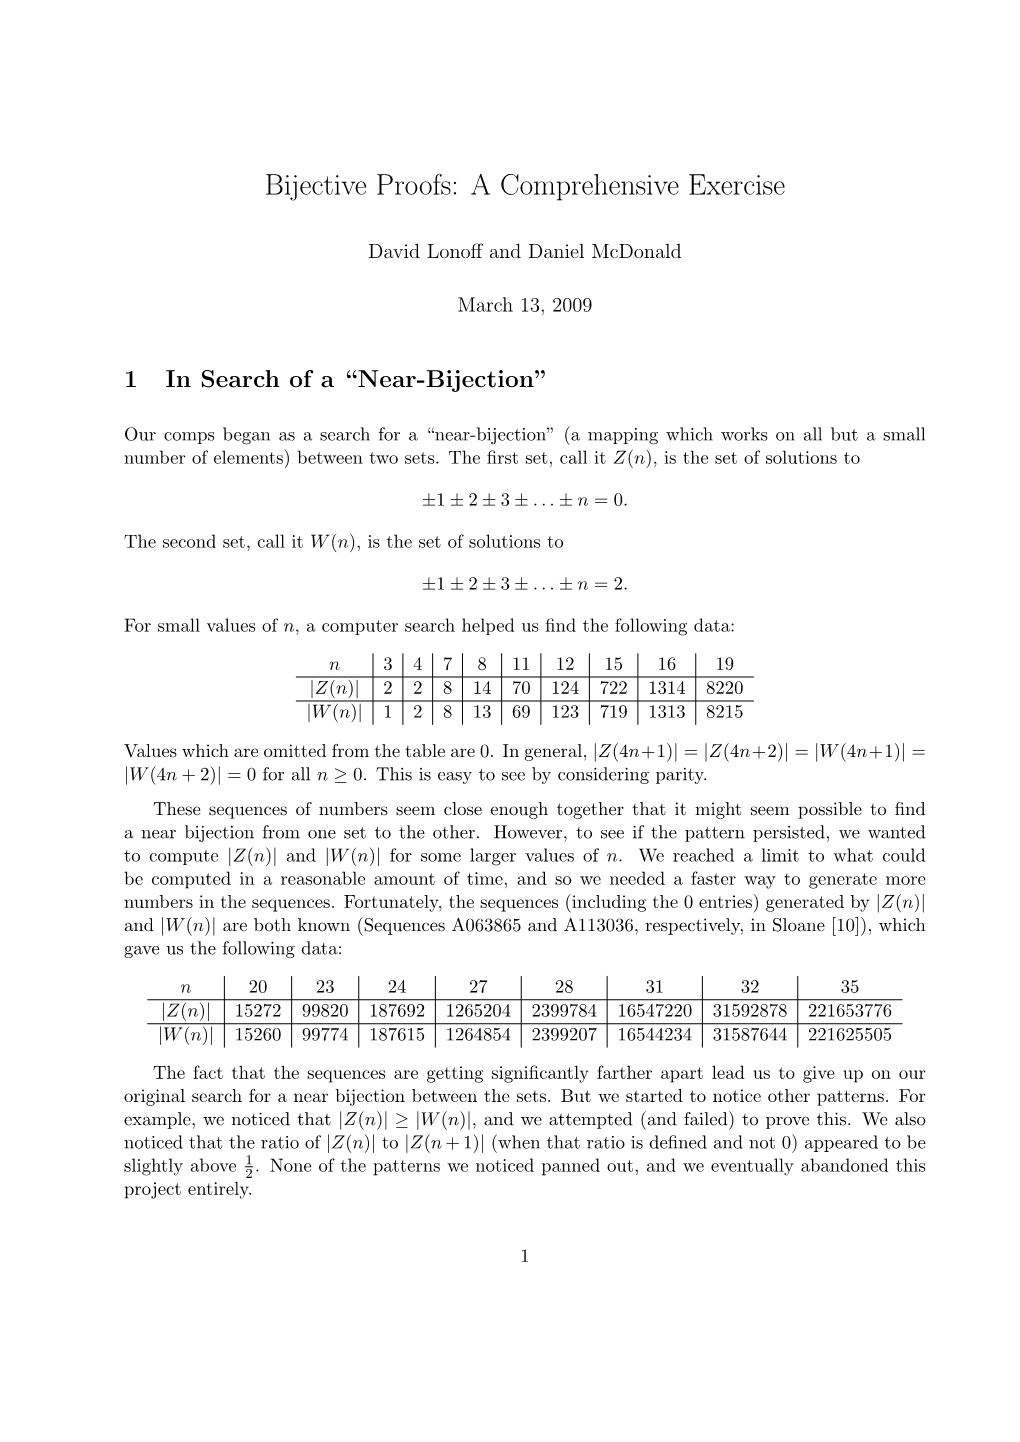 Bijective Proofs: a Comprehensive Exercise